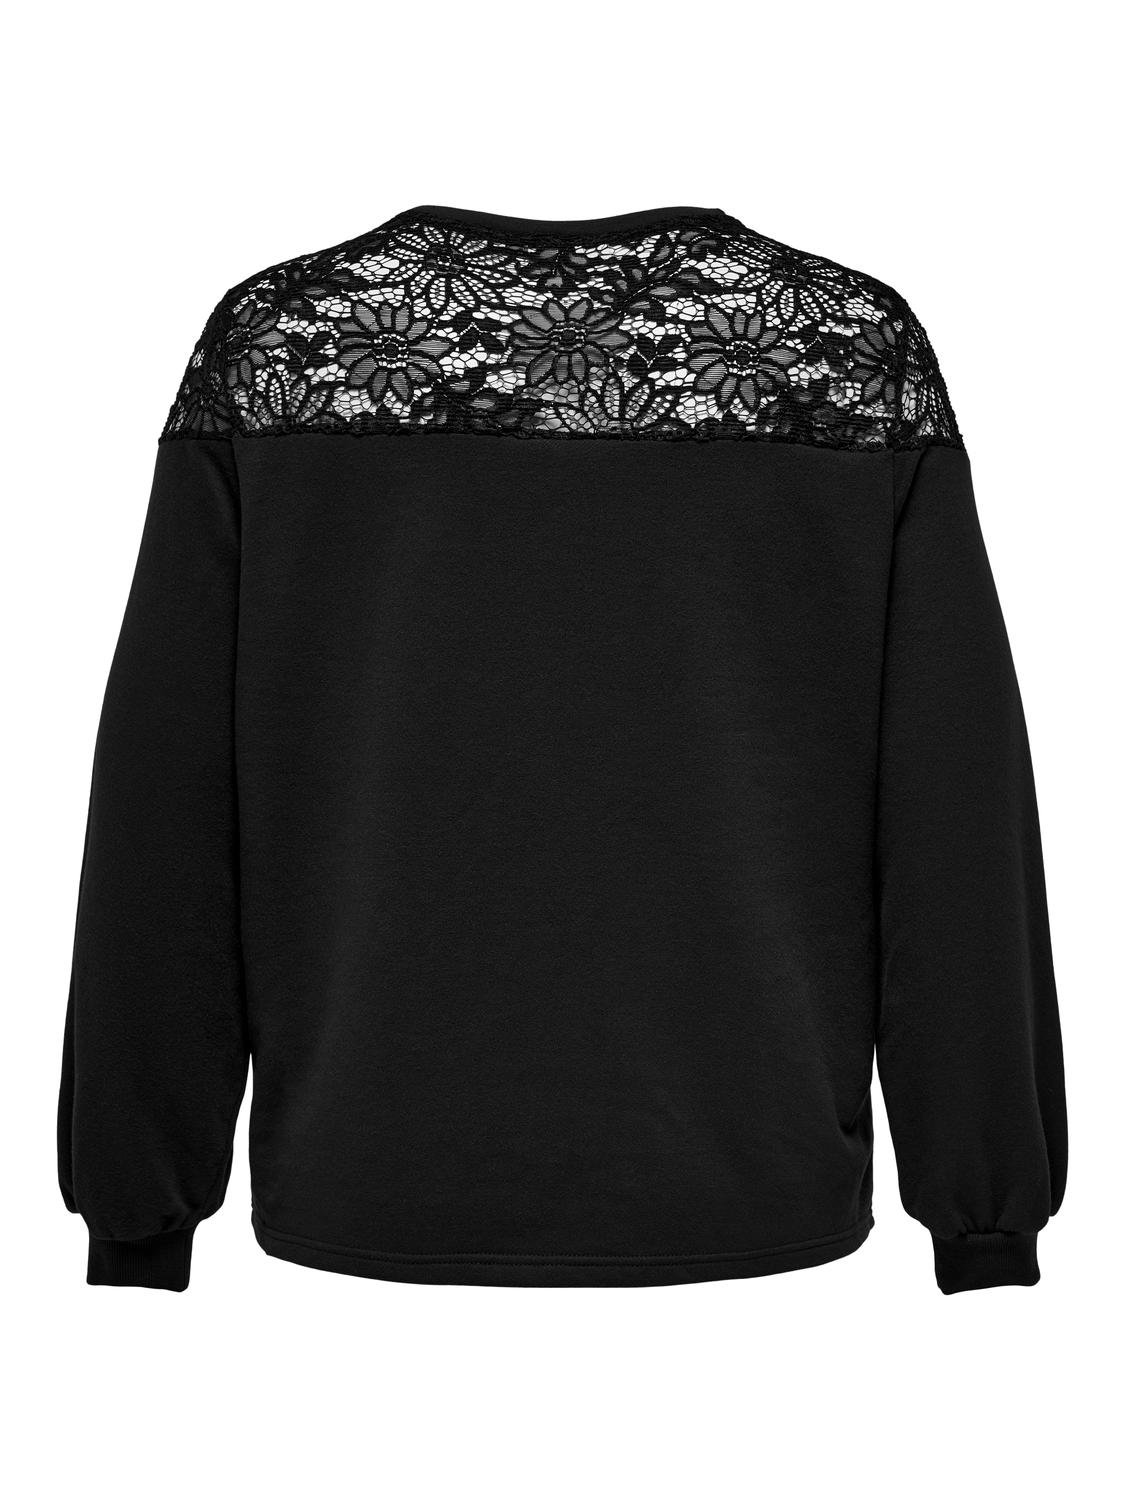 ONLY Curvy sweatshirt with lace -Black - 15309401